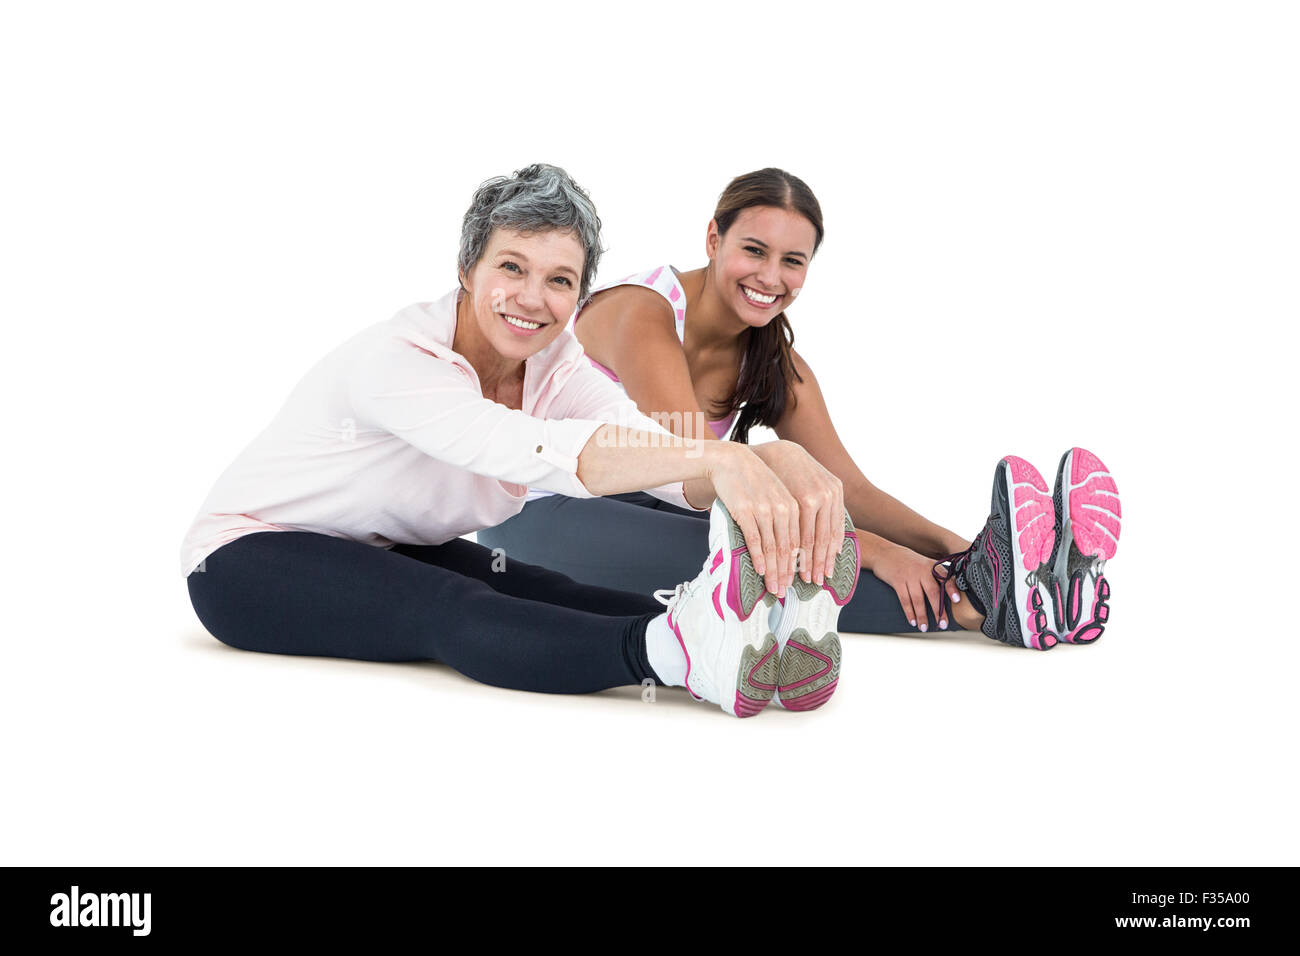 Slim woman 50s Cut Out Stock Images & Pictures - Alamy